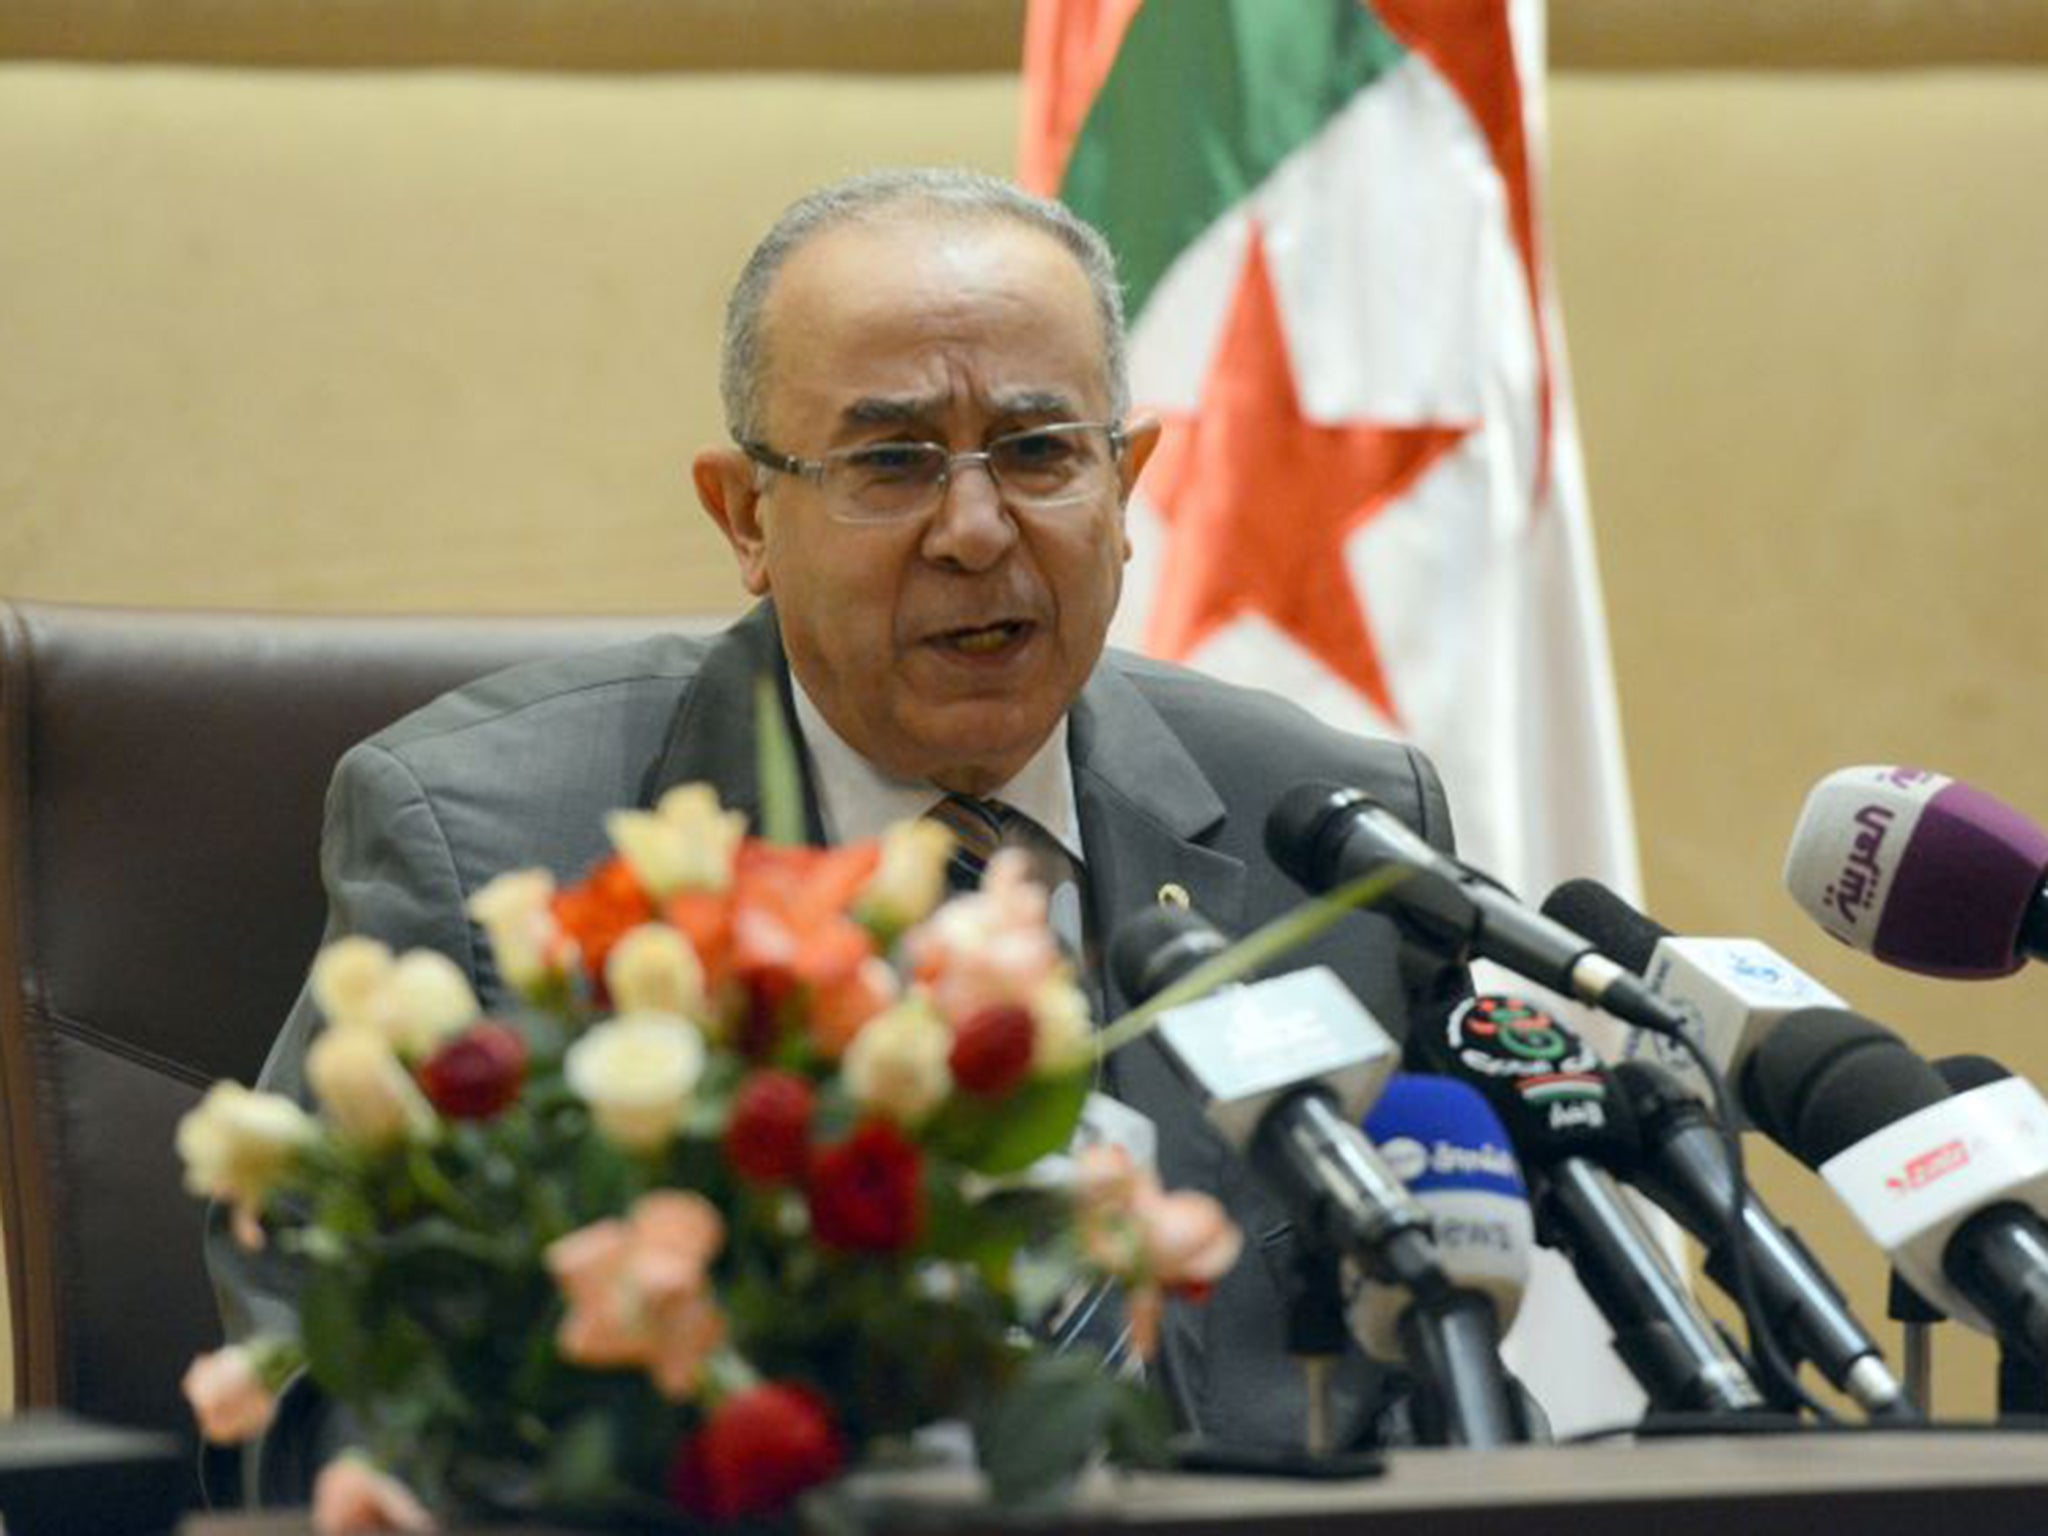 Ramtane Lamamra wants Algeria to play a more active role in talks on its neighbour